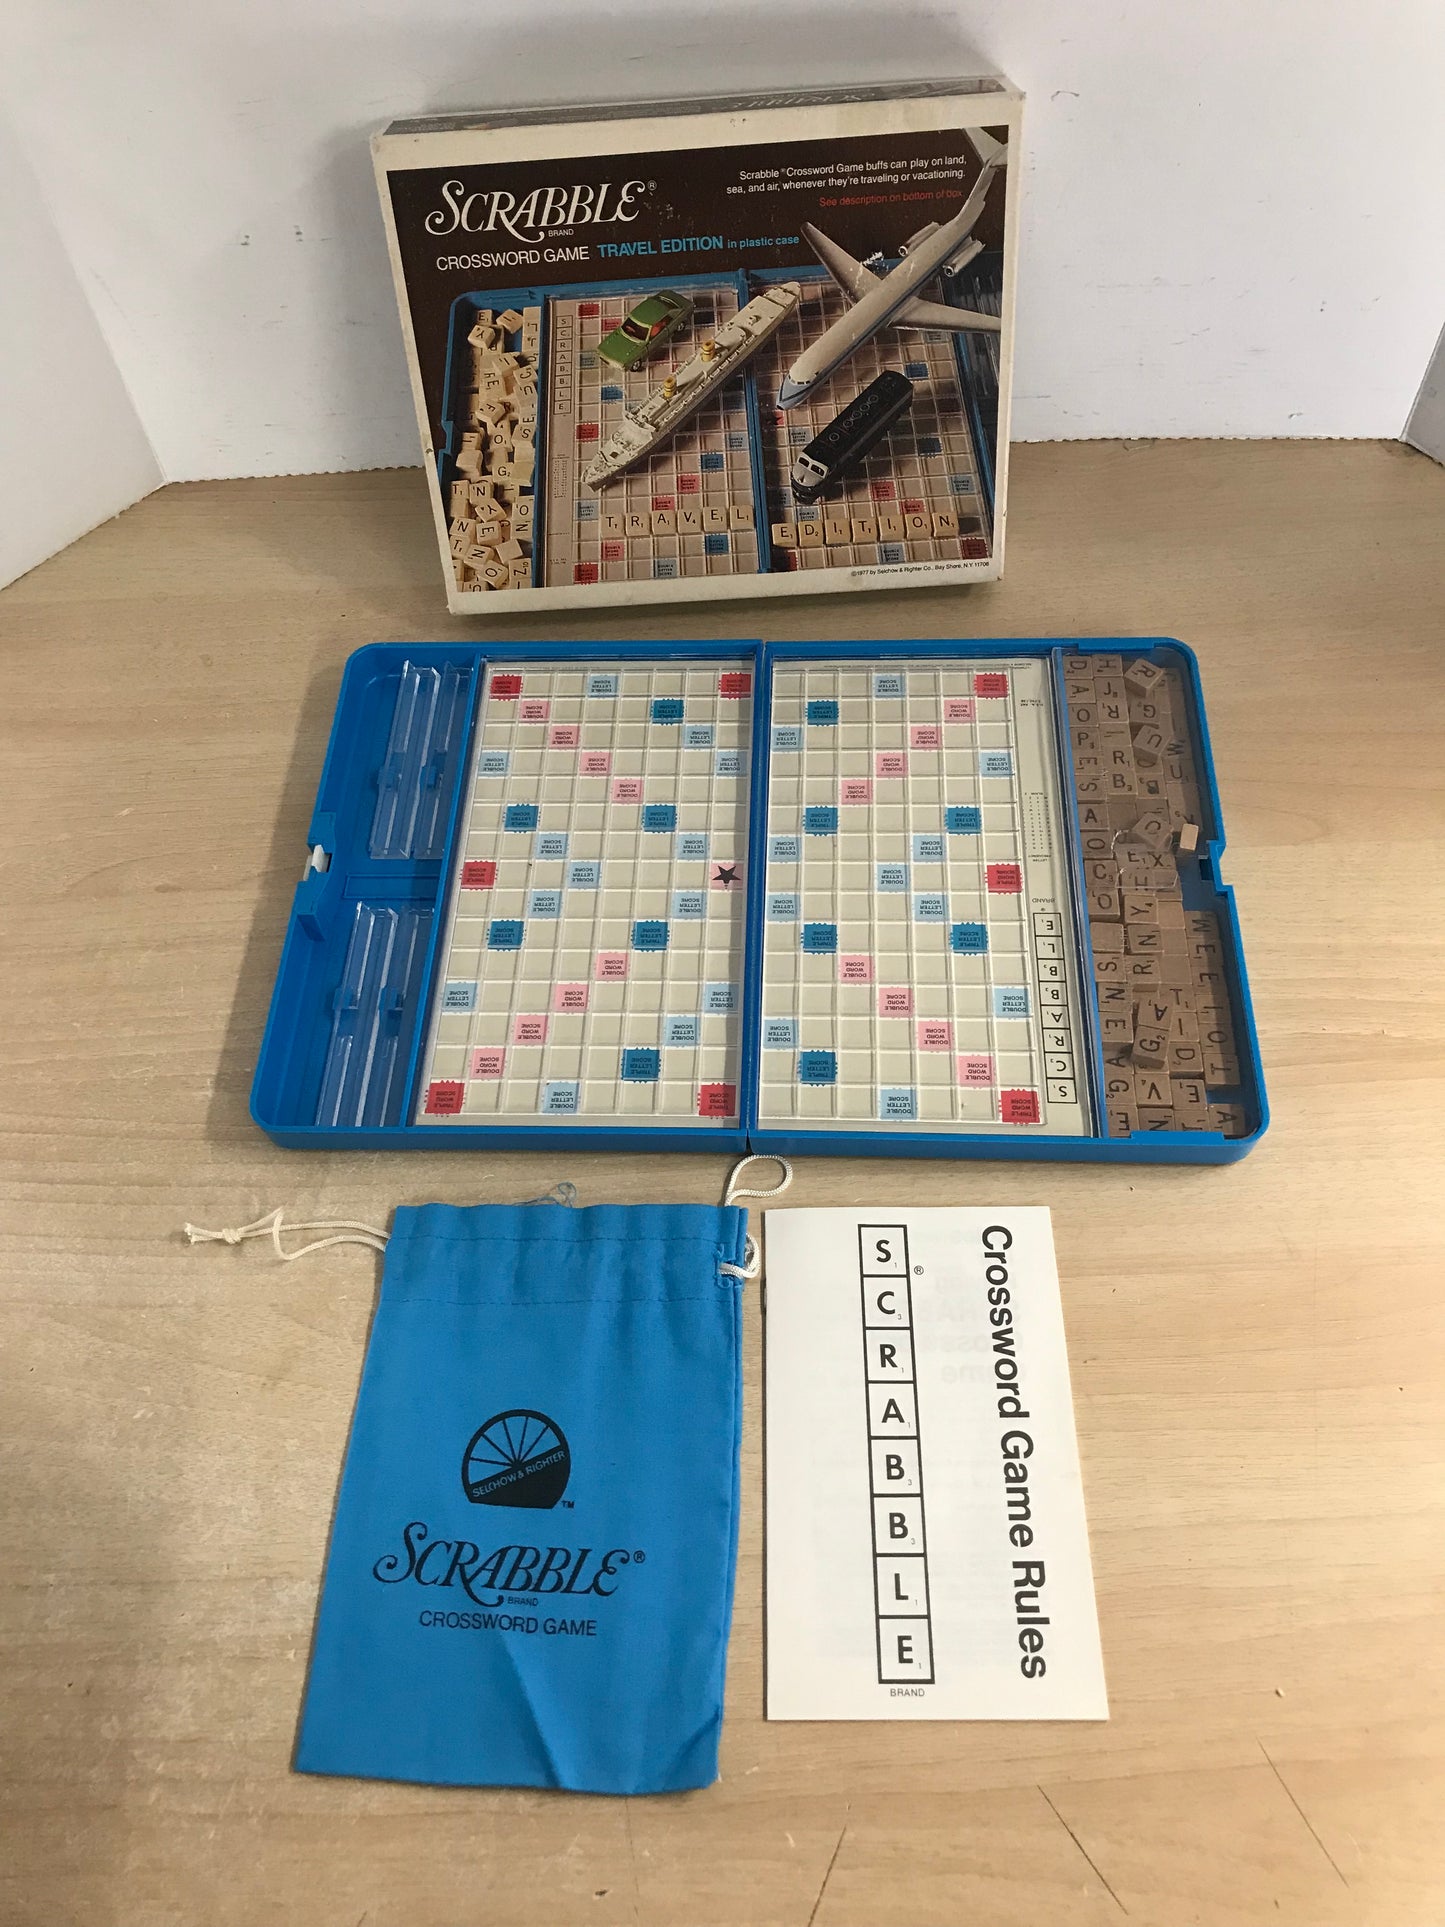 Game 1977 Vintage Scrabble Travel Edition 52 Complete As New RARE to find